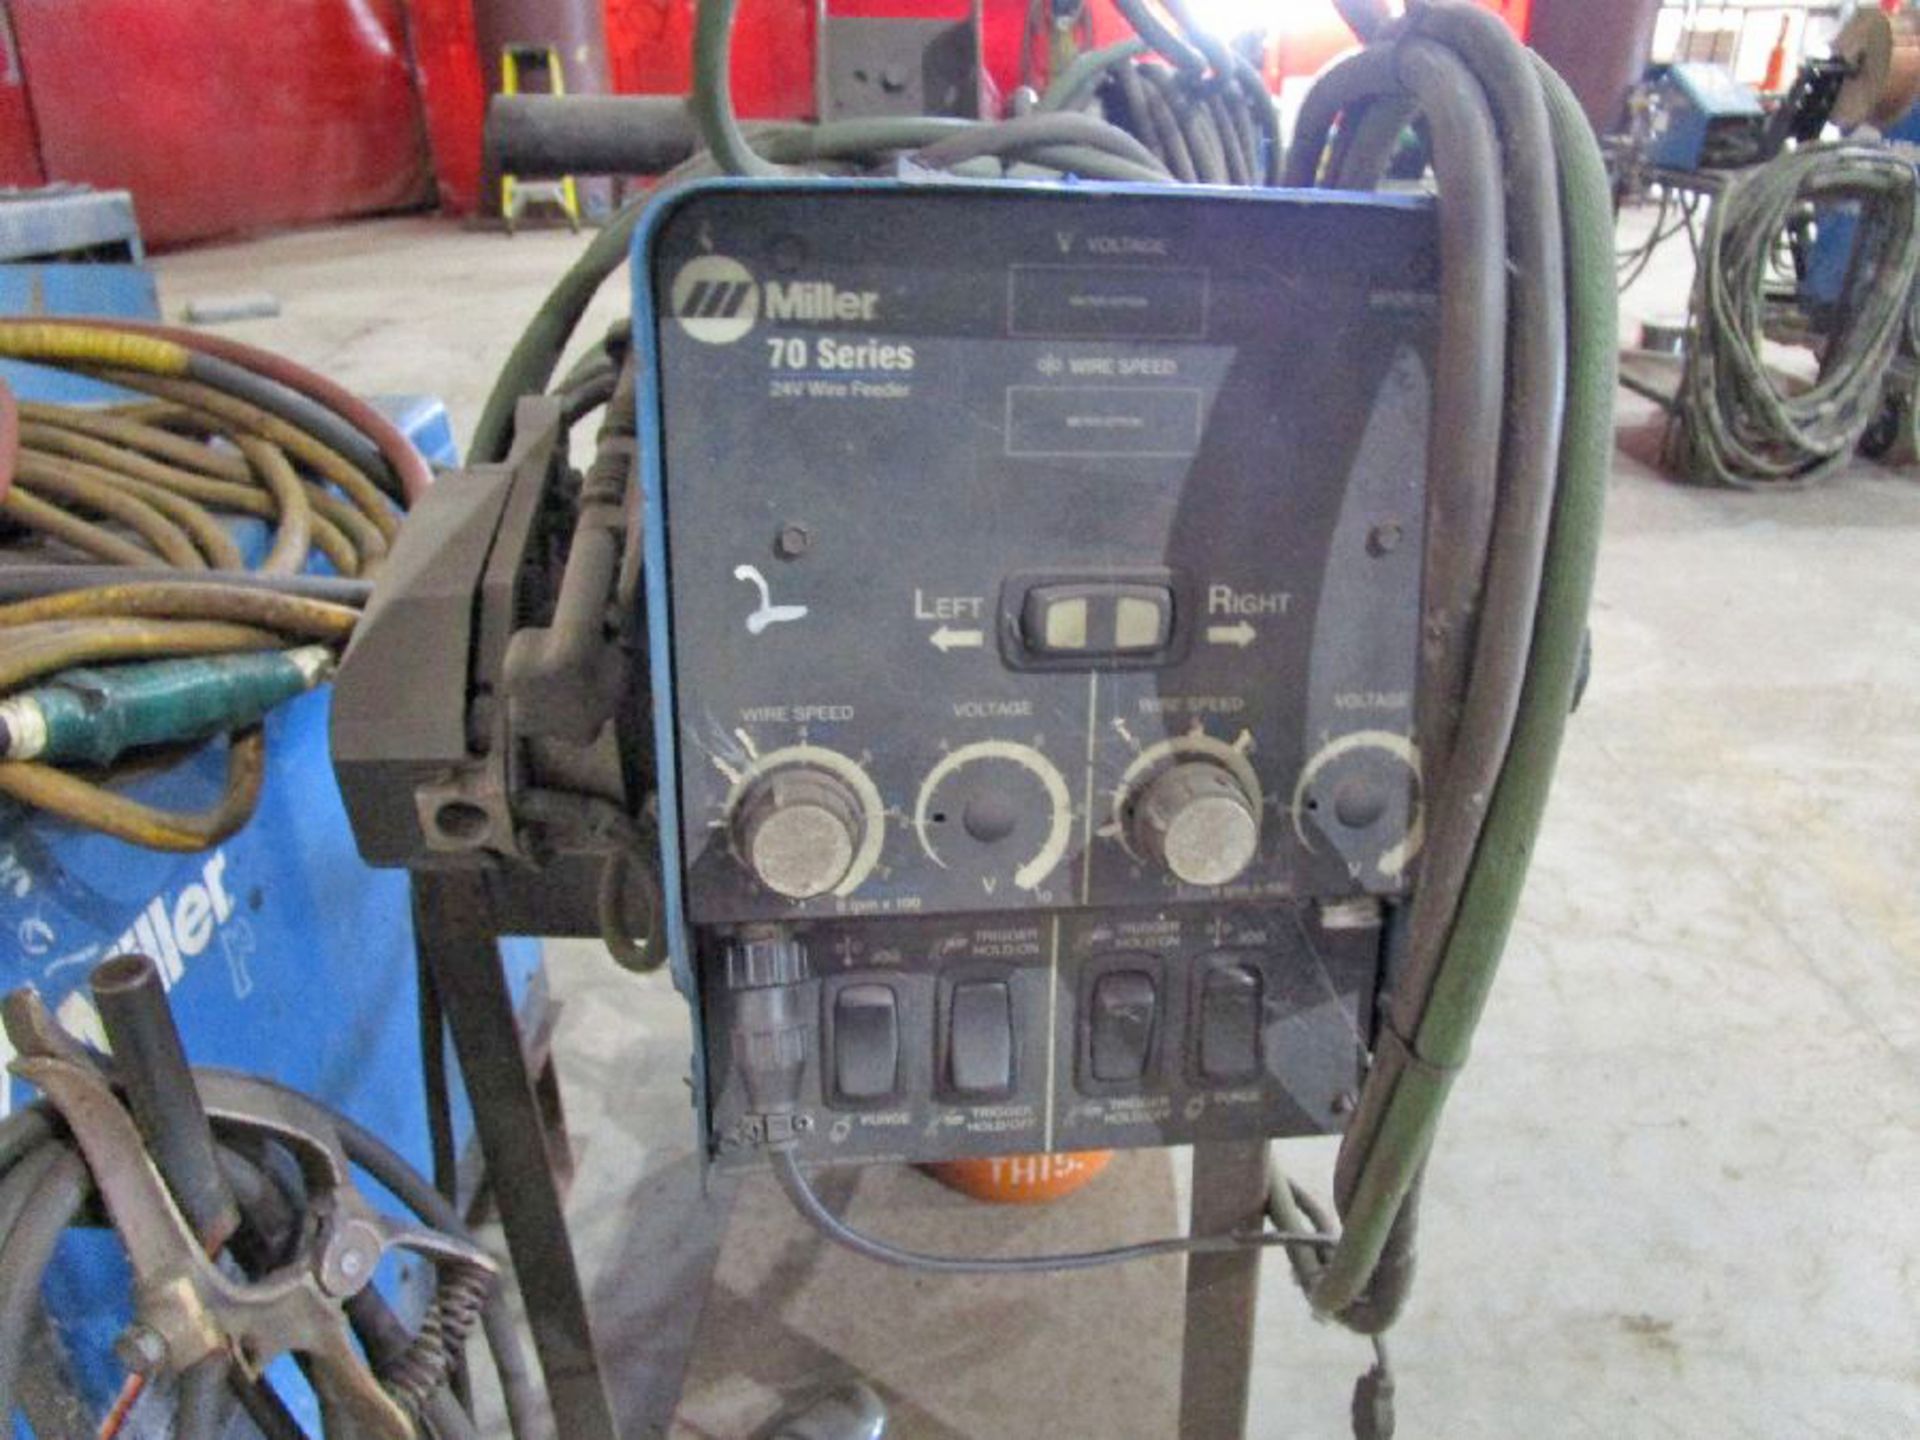 Miller Model Dimention NT 450 Welding Power Source - Image 5 of 6